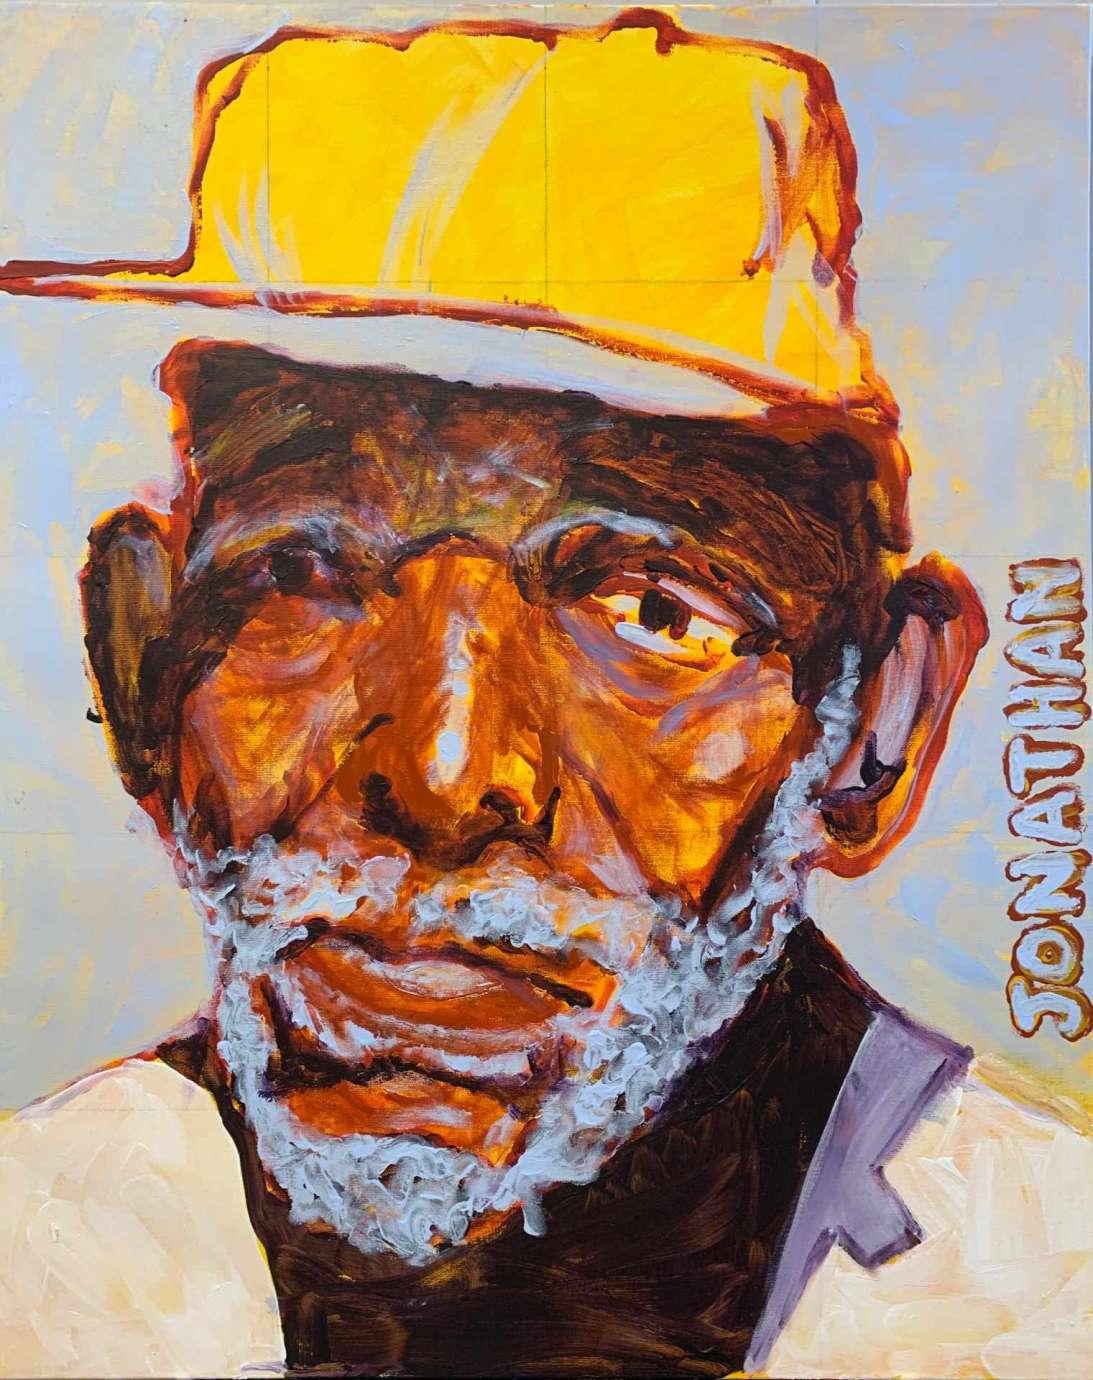  A Black man with a white beard wearing a yellow hat and white shirt